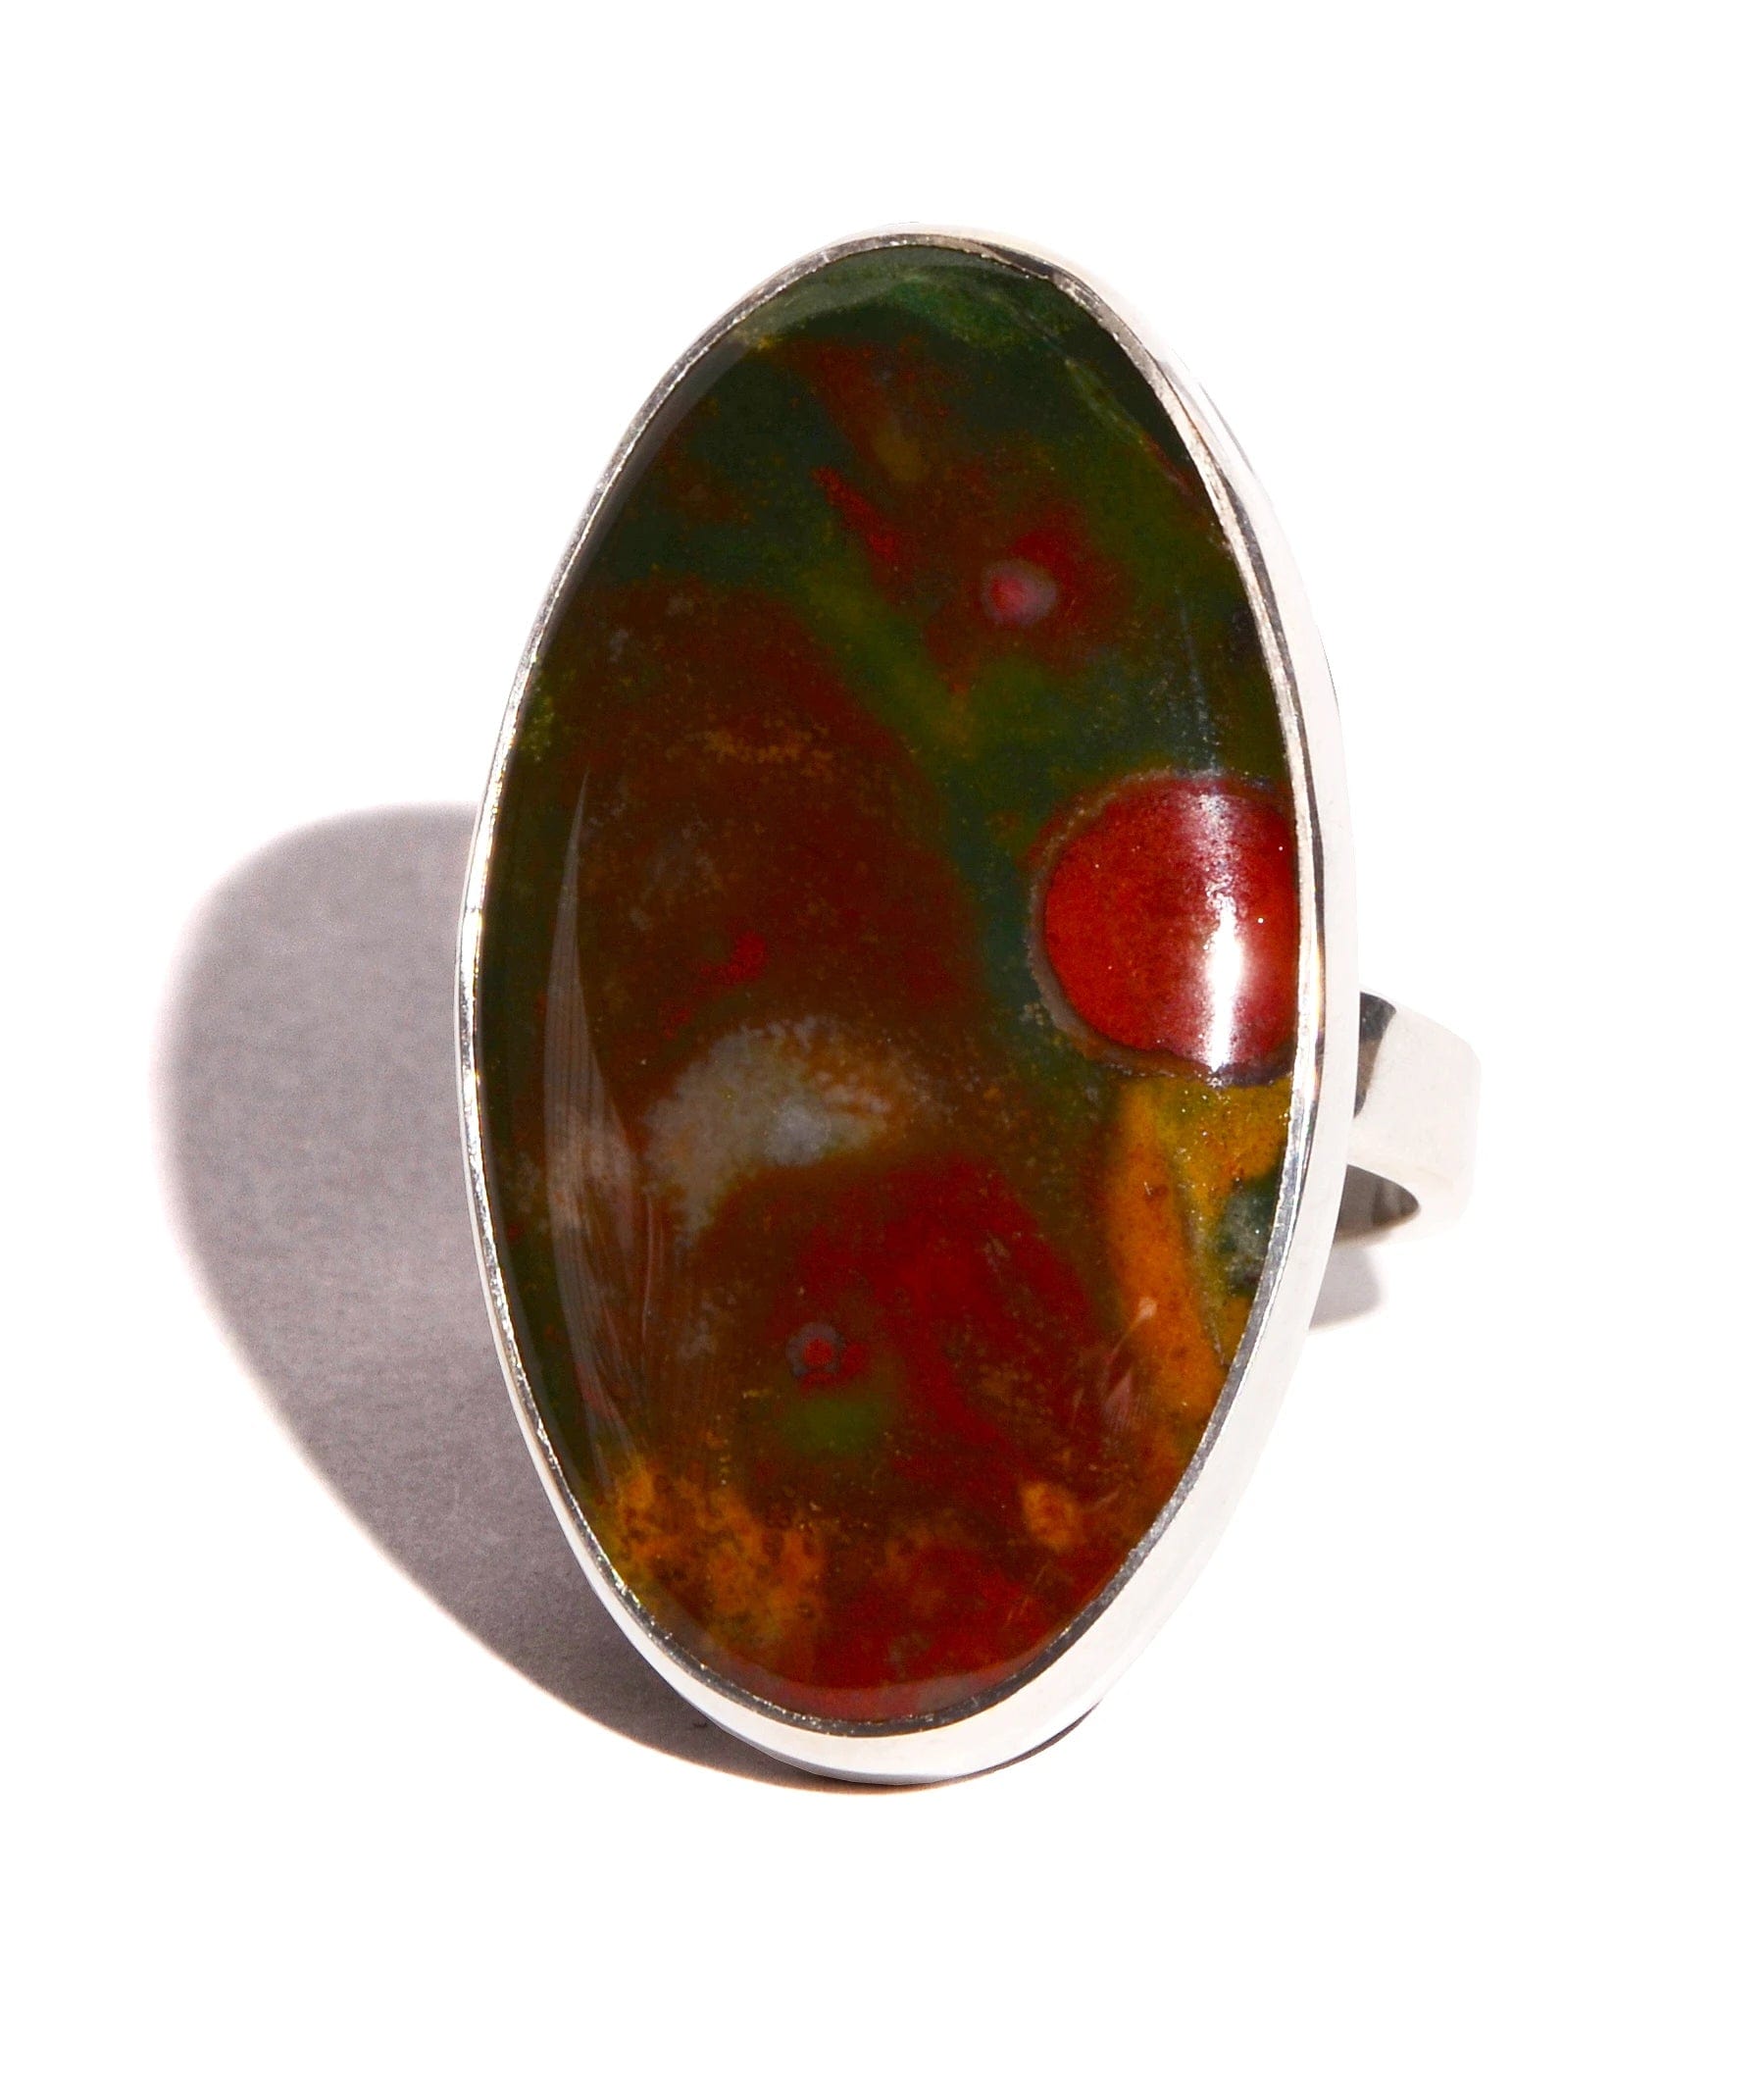 Bloodstone: Meaning, Properties, and Benefits You Should Know